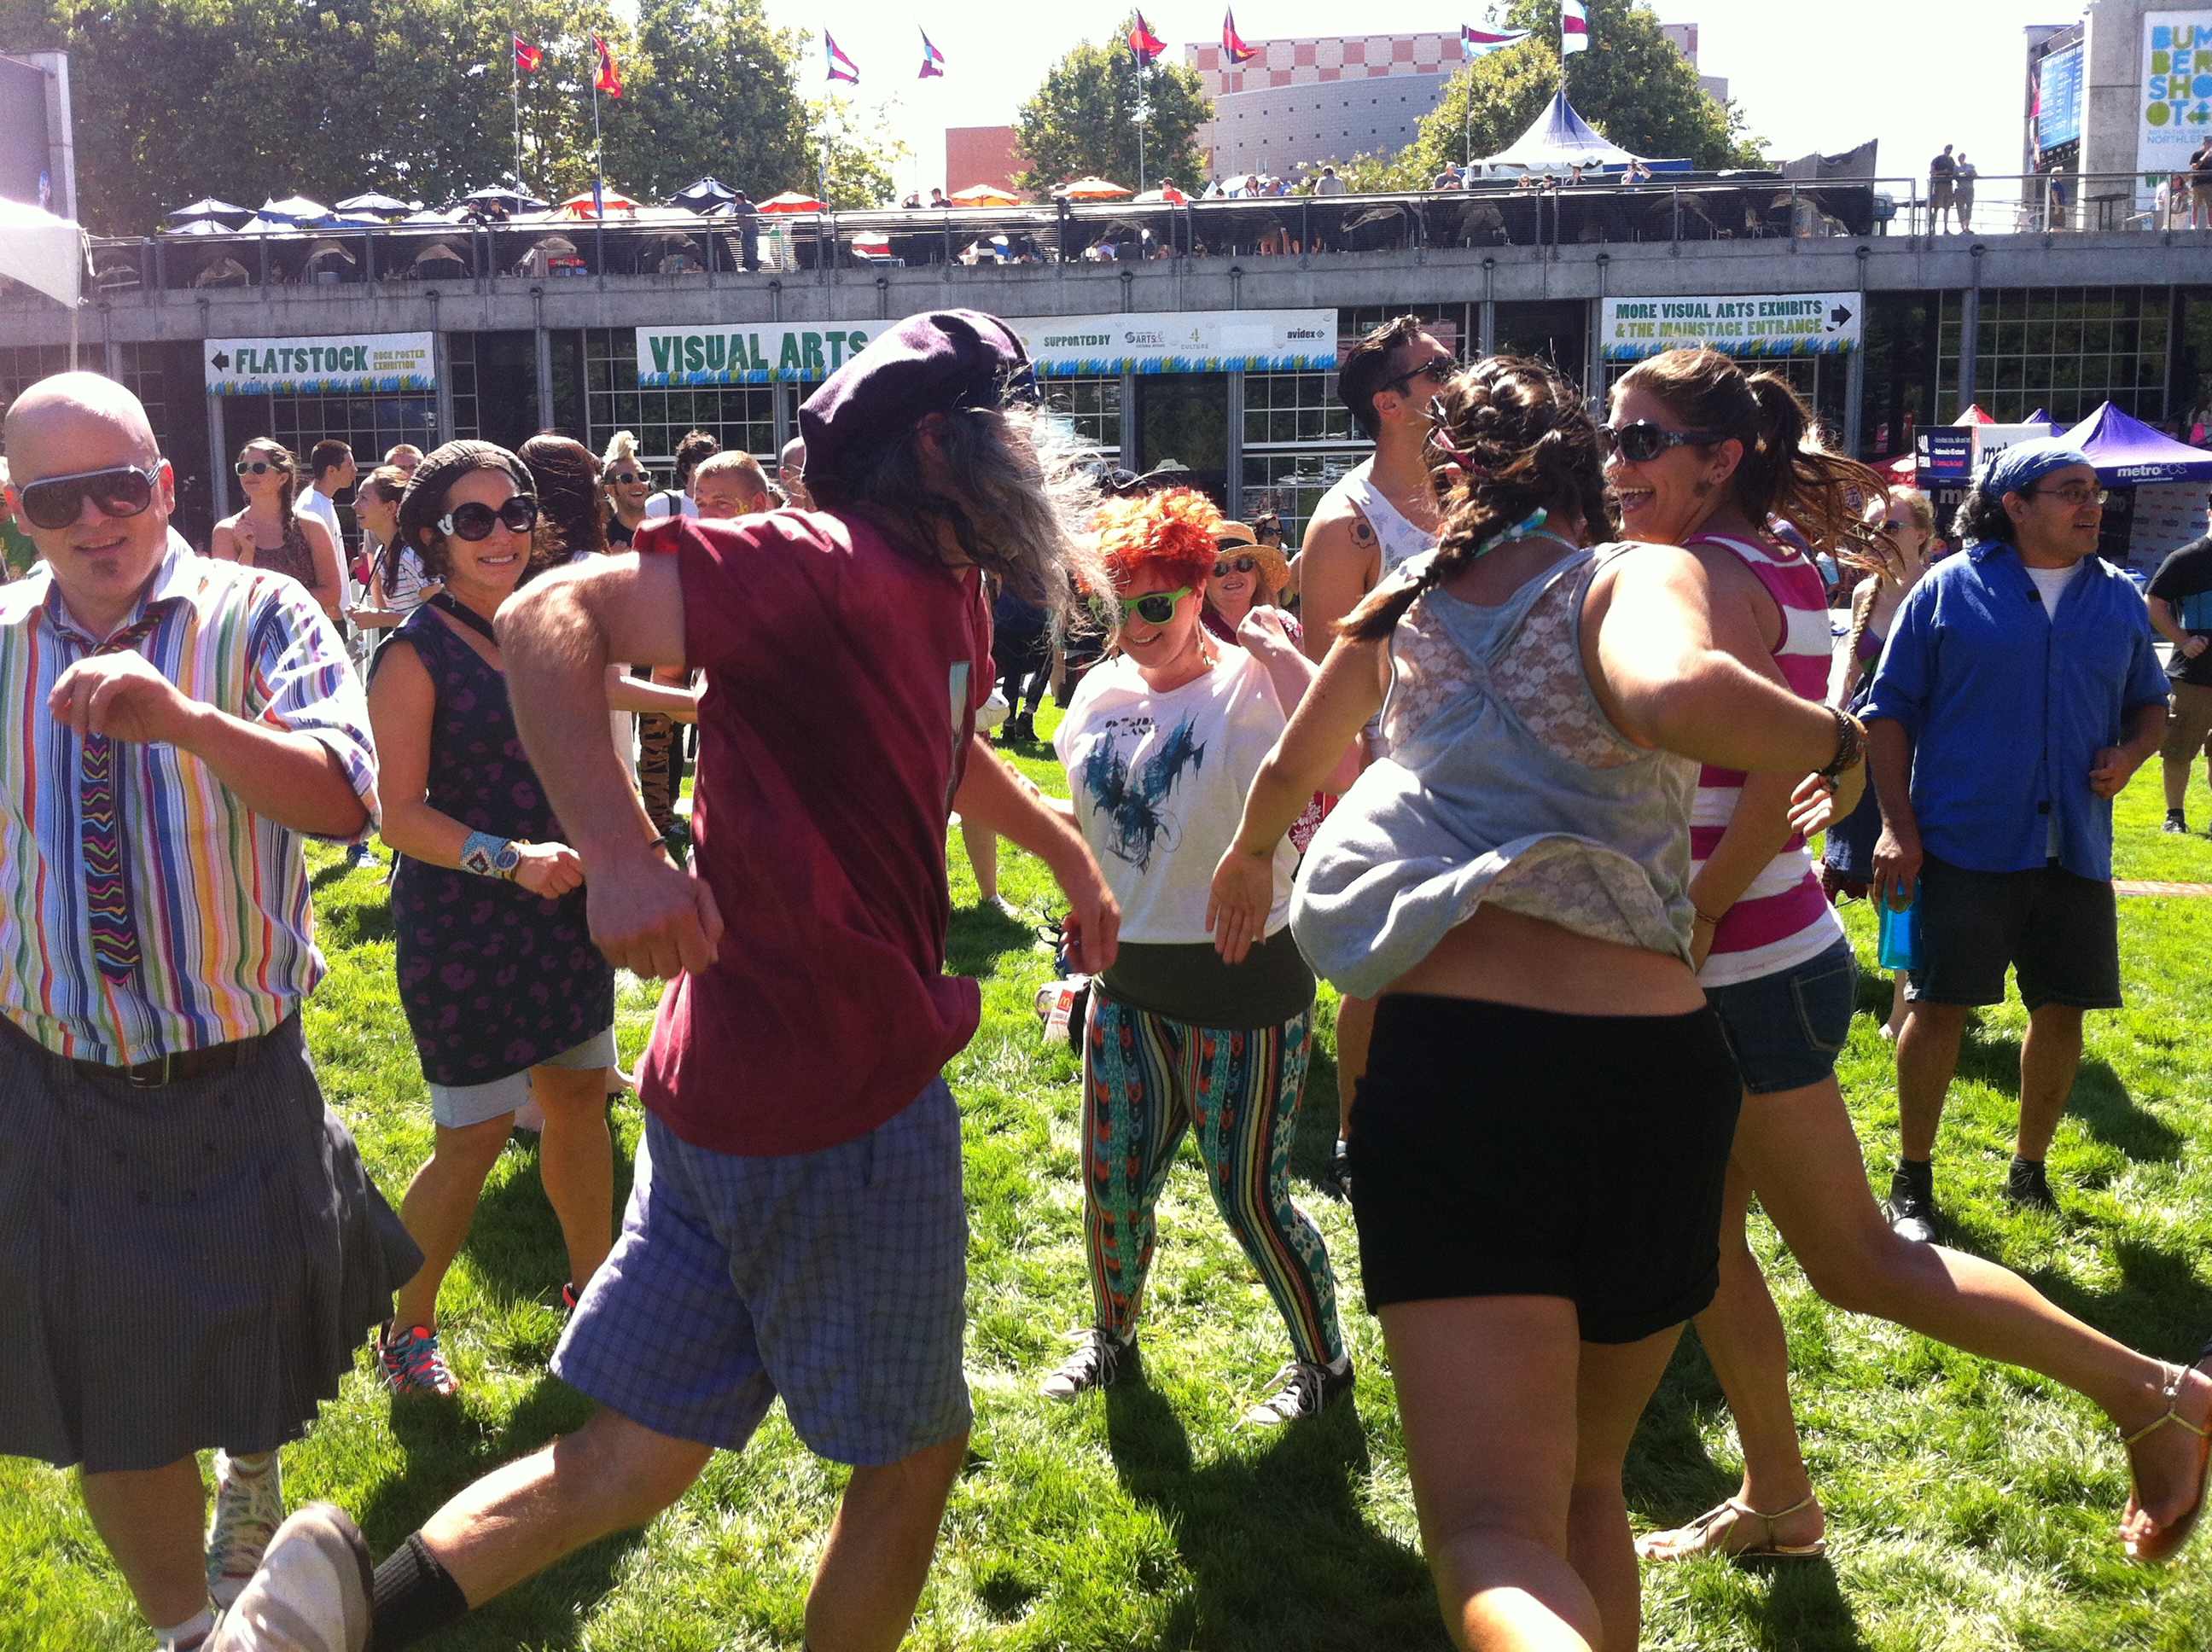 Despite the sunny skies and a heavy early crowd, Bumbershoot got off